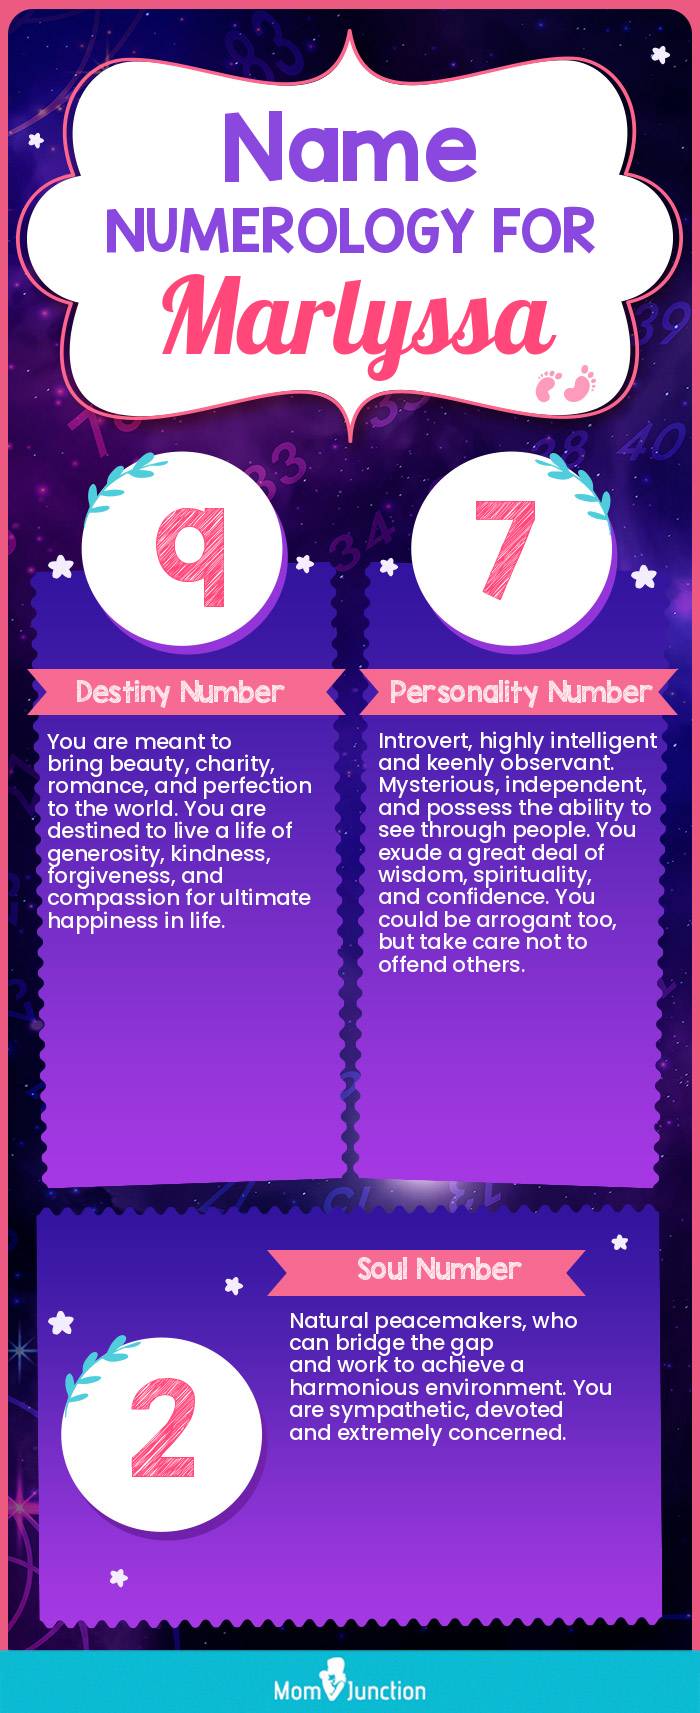 name-numerology-for-marlyssa-girl